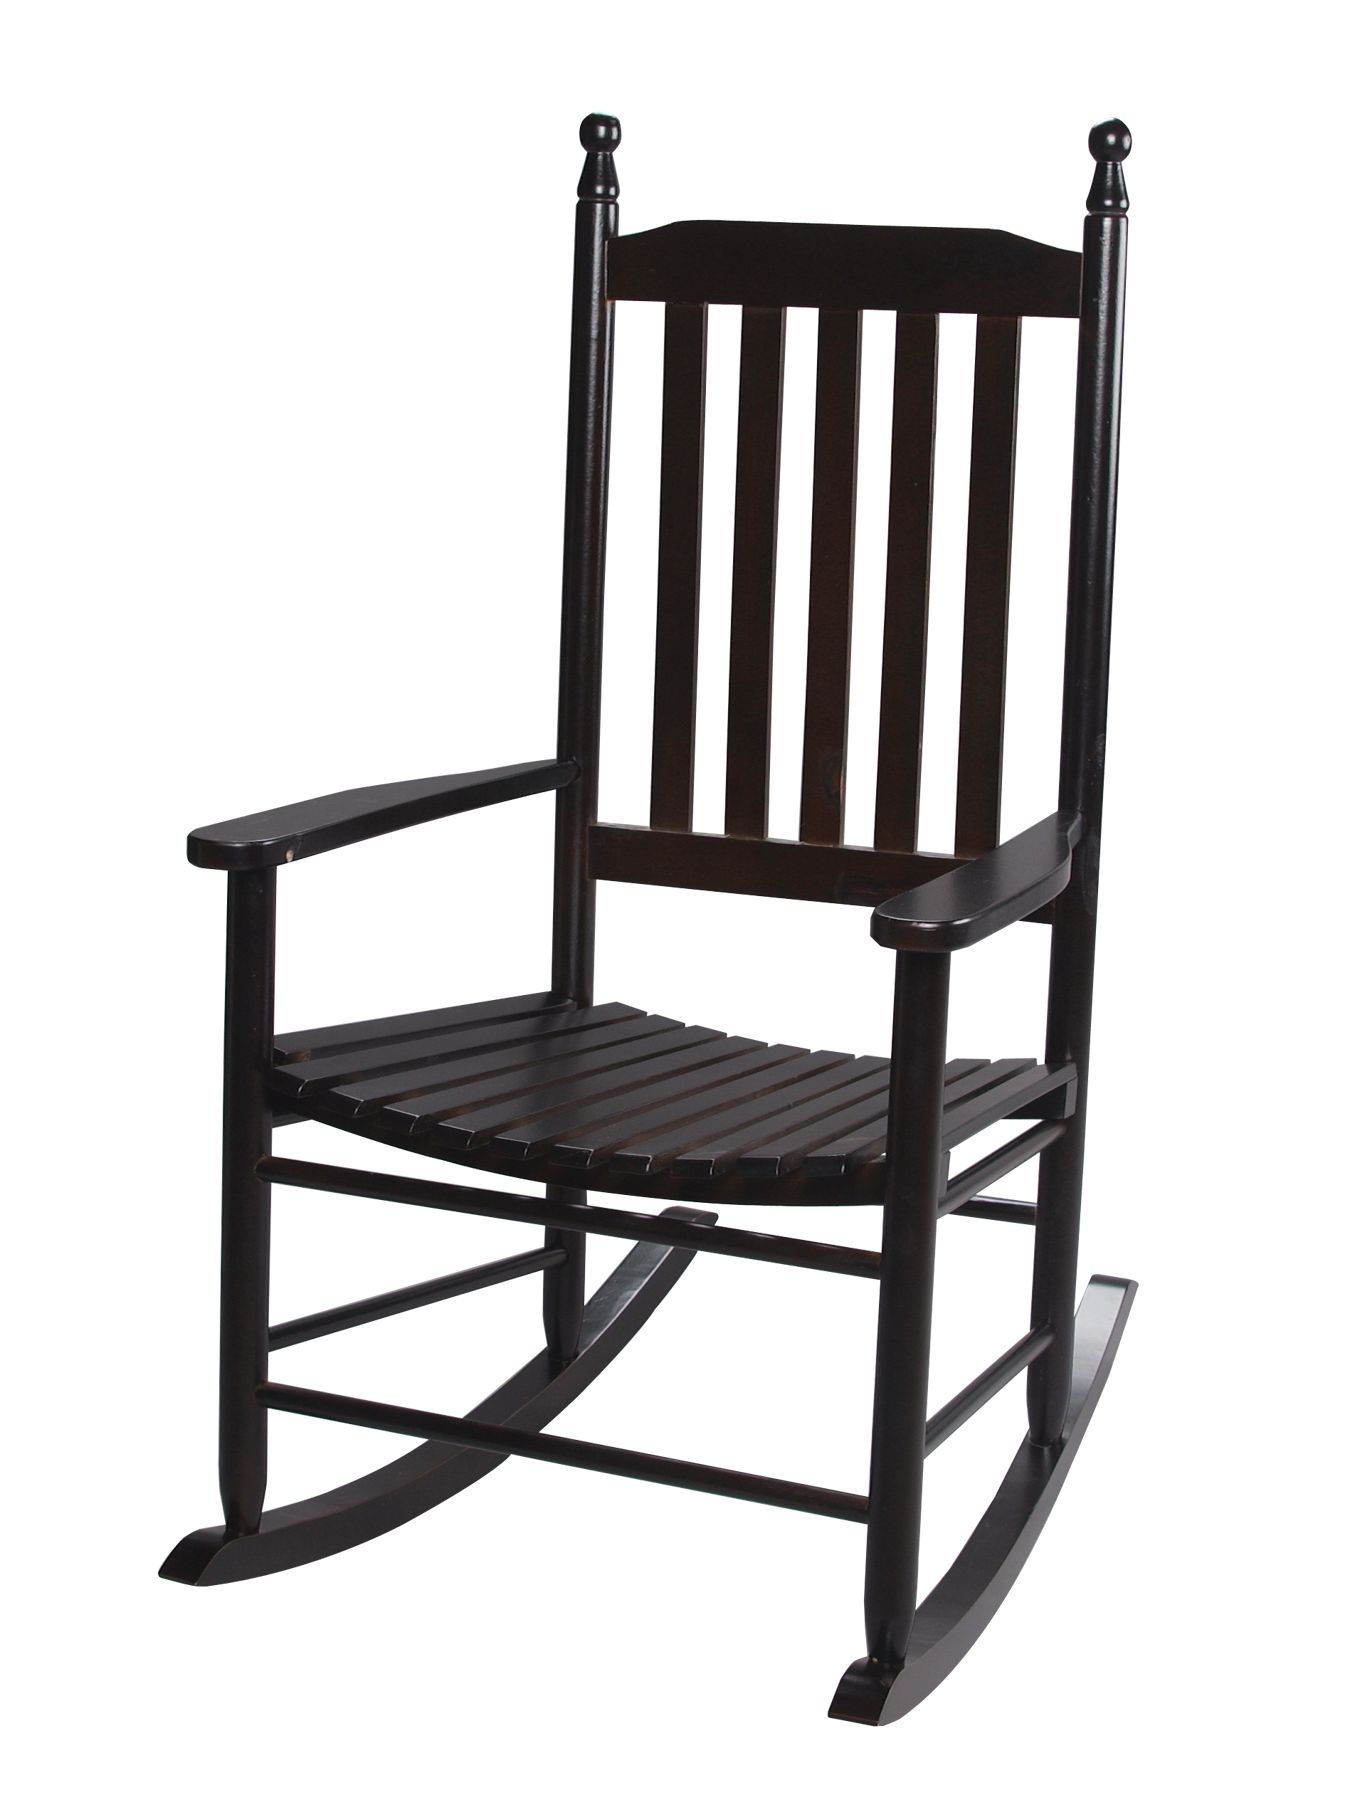 Gift Mark Adult Tall Back Rocking Chair - Espresso